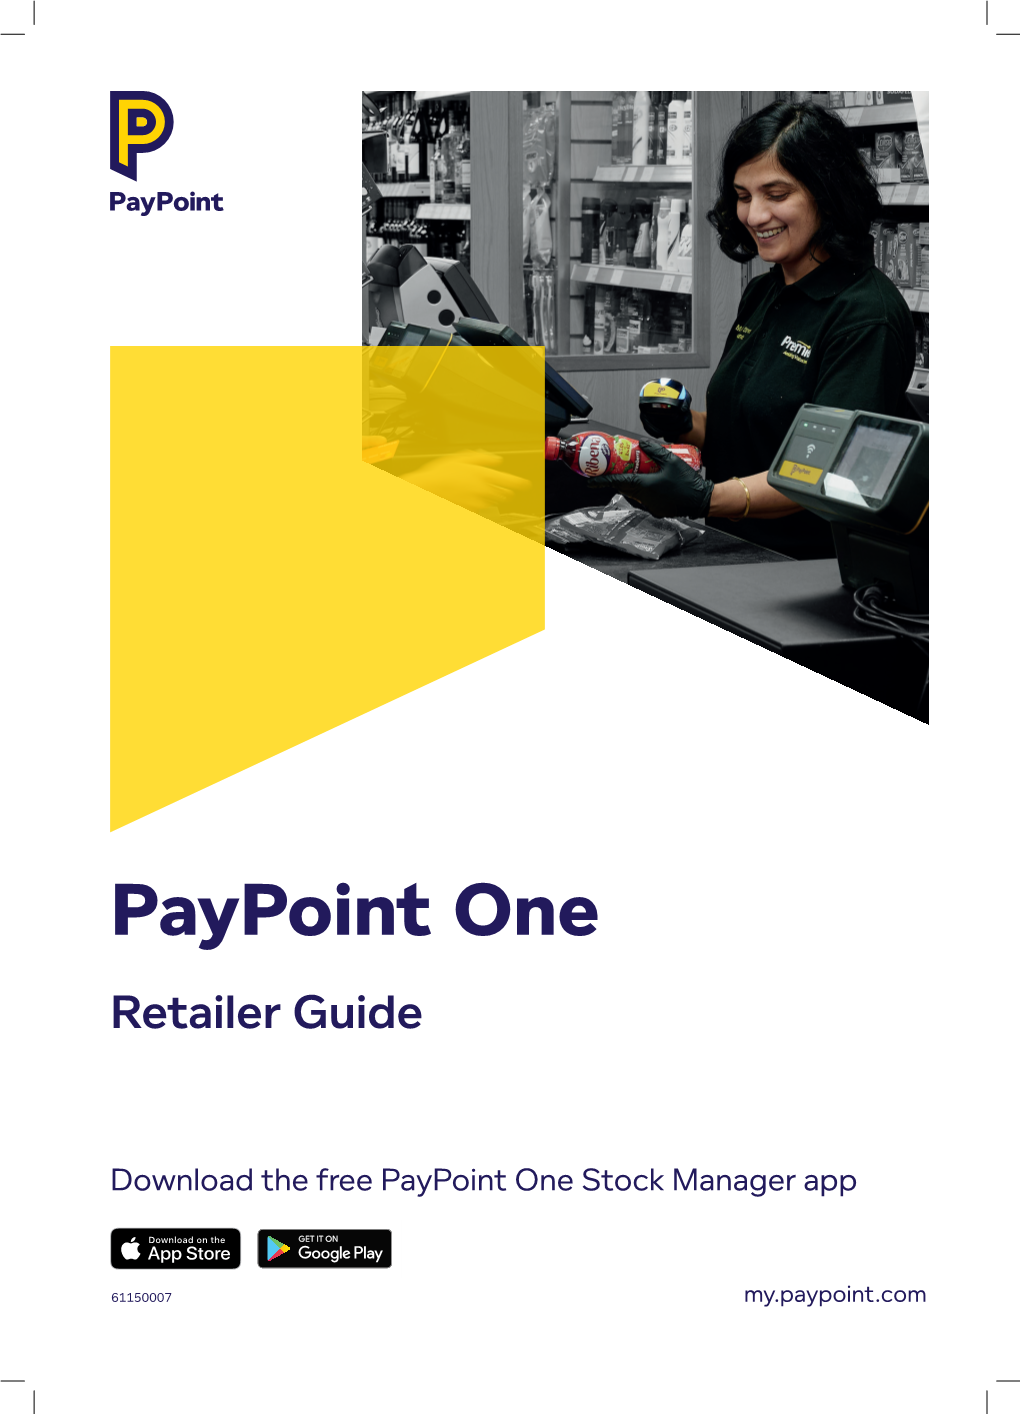 Paypoint Retailer Guide.Pdf